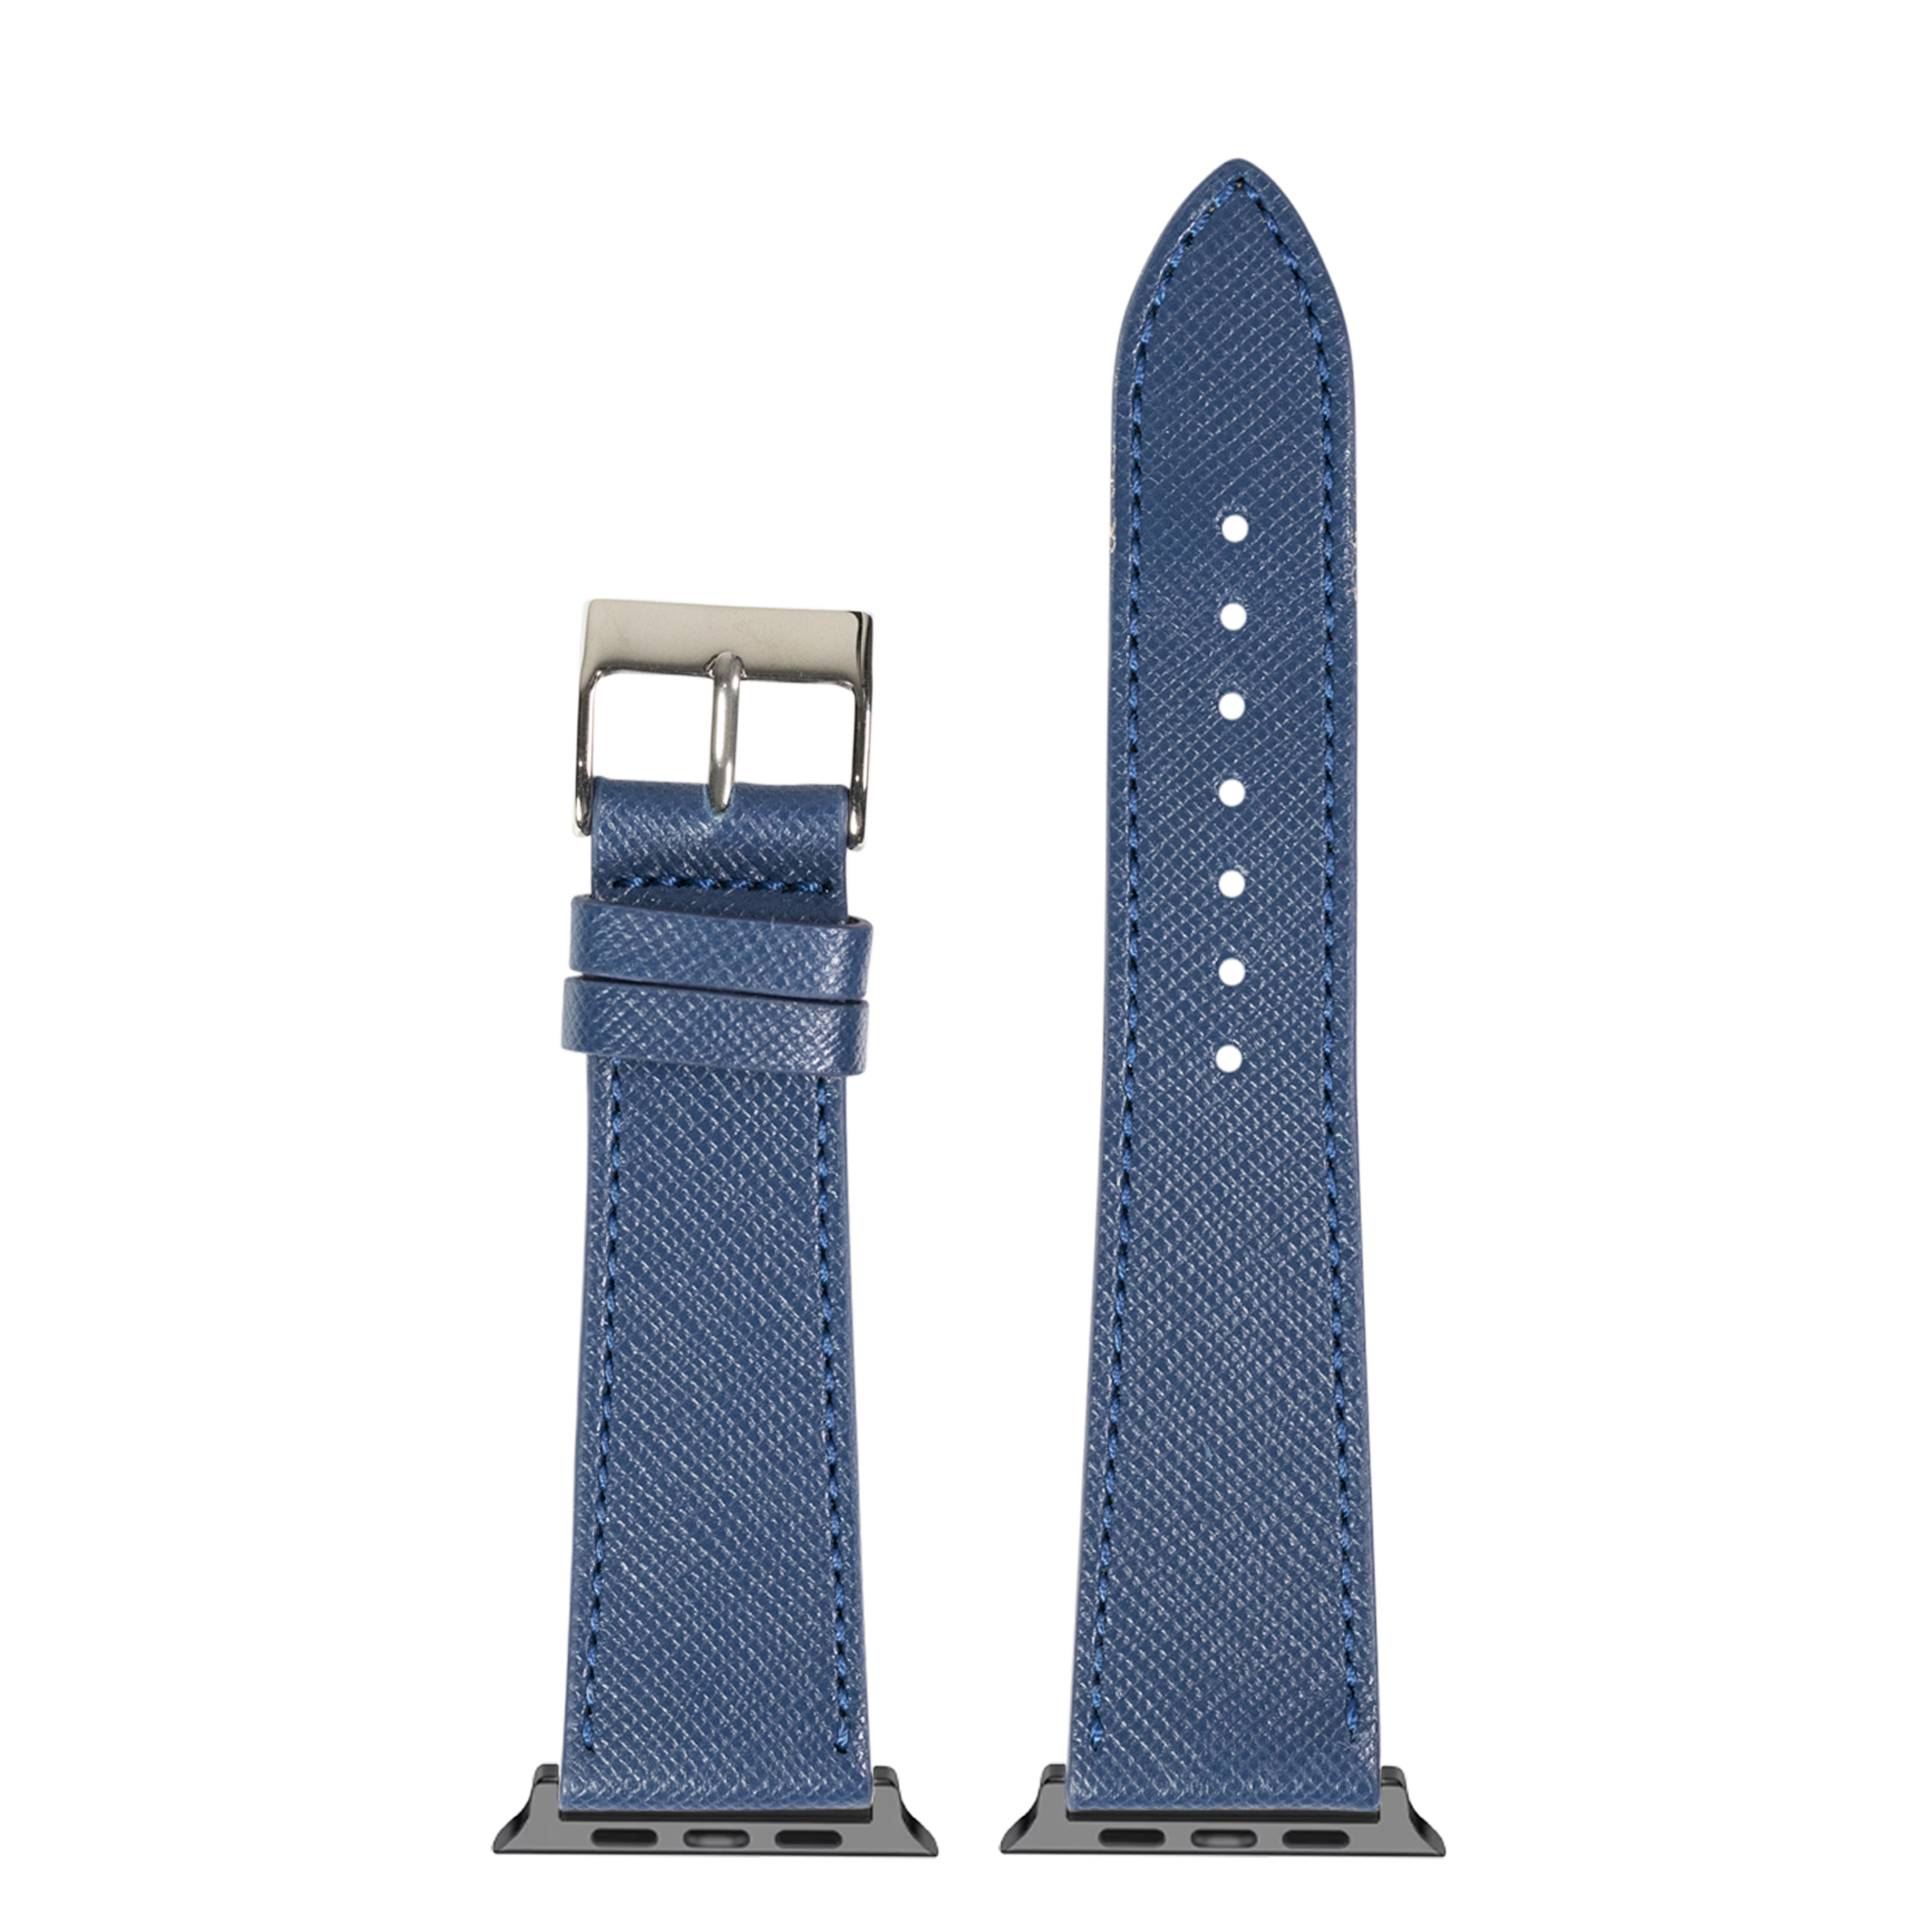 [Apple Watch] Saffiano Leather - Navy Blue